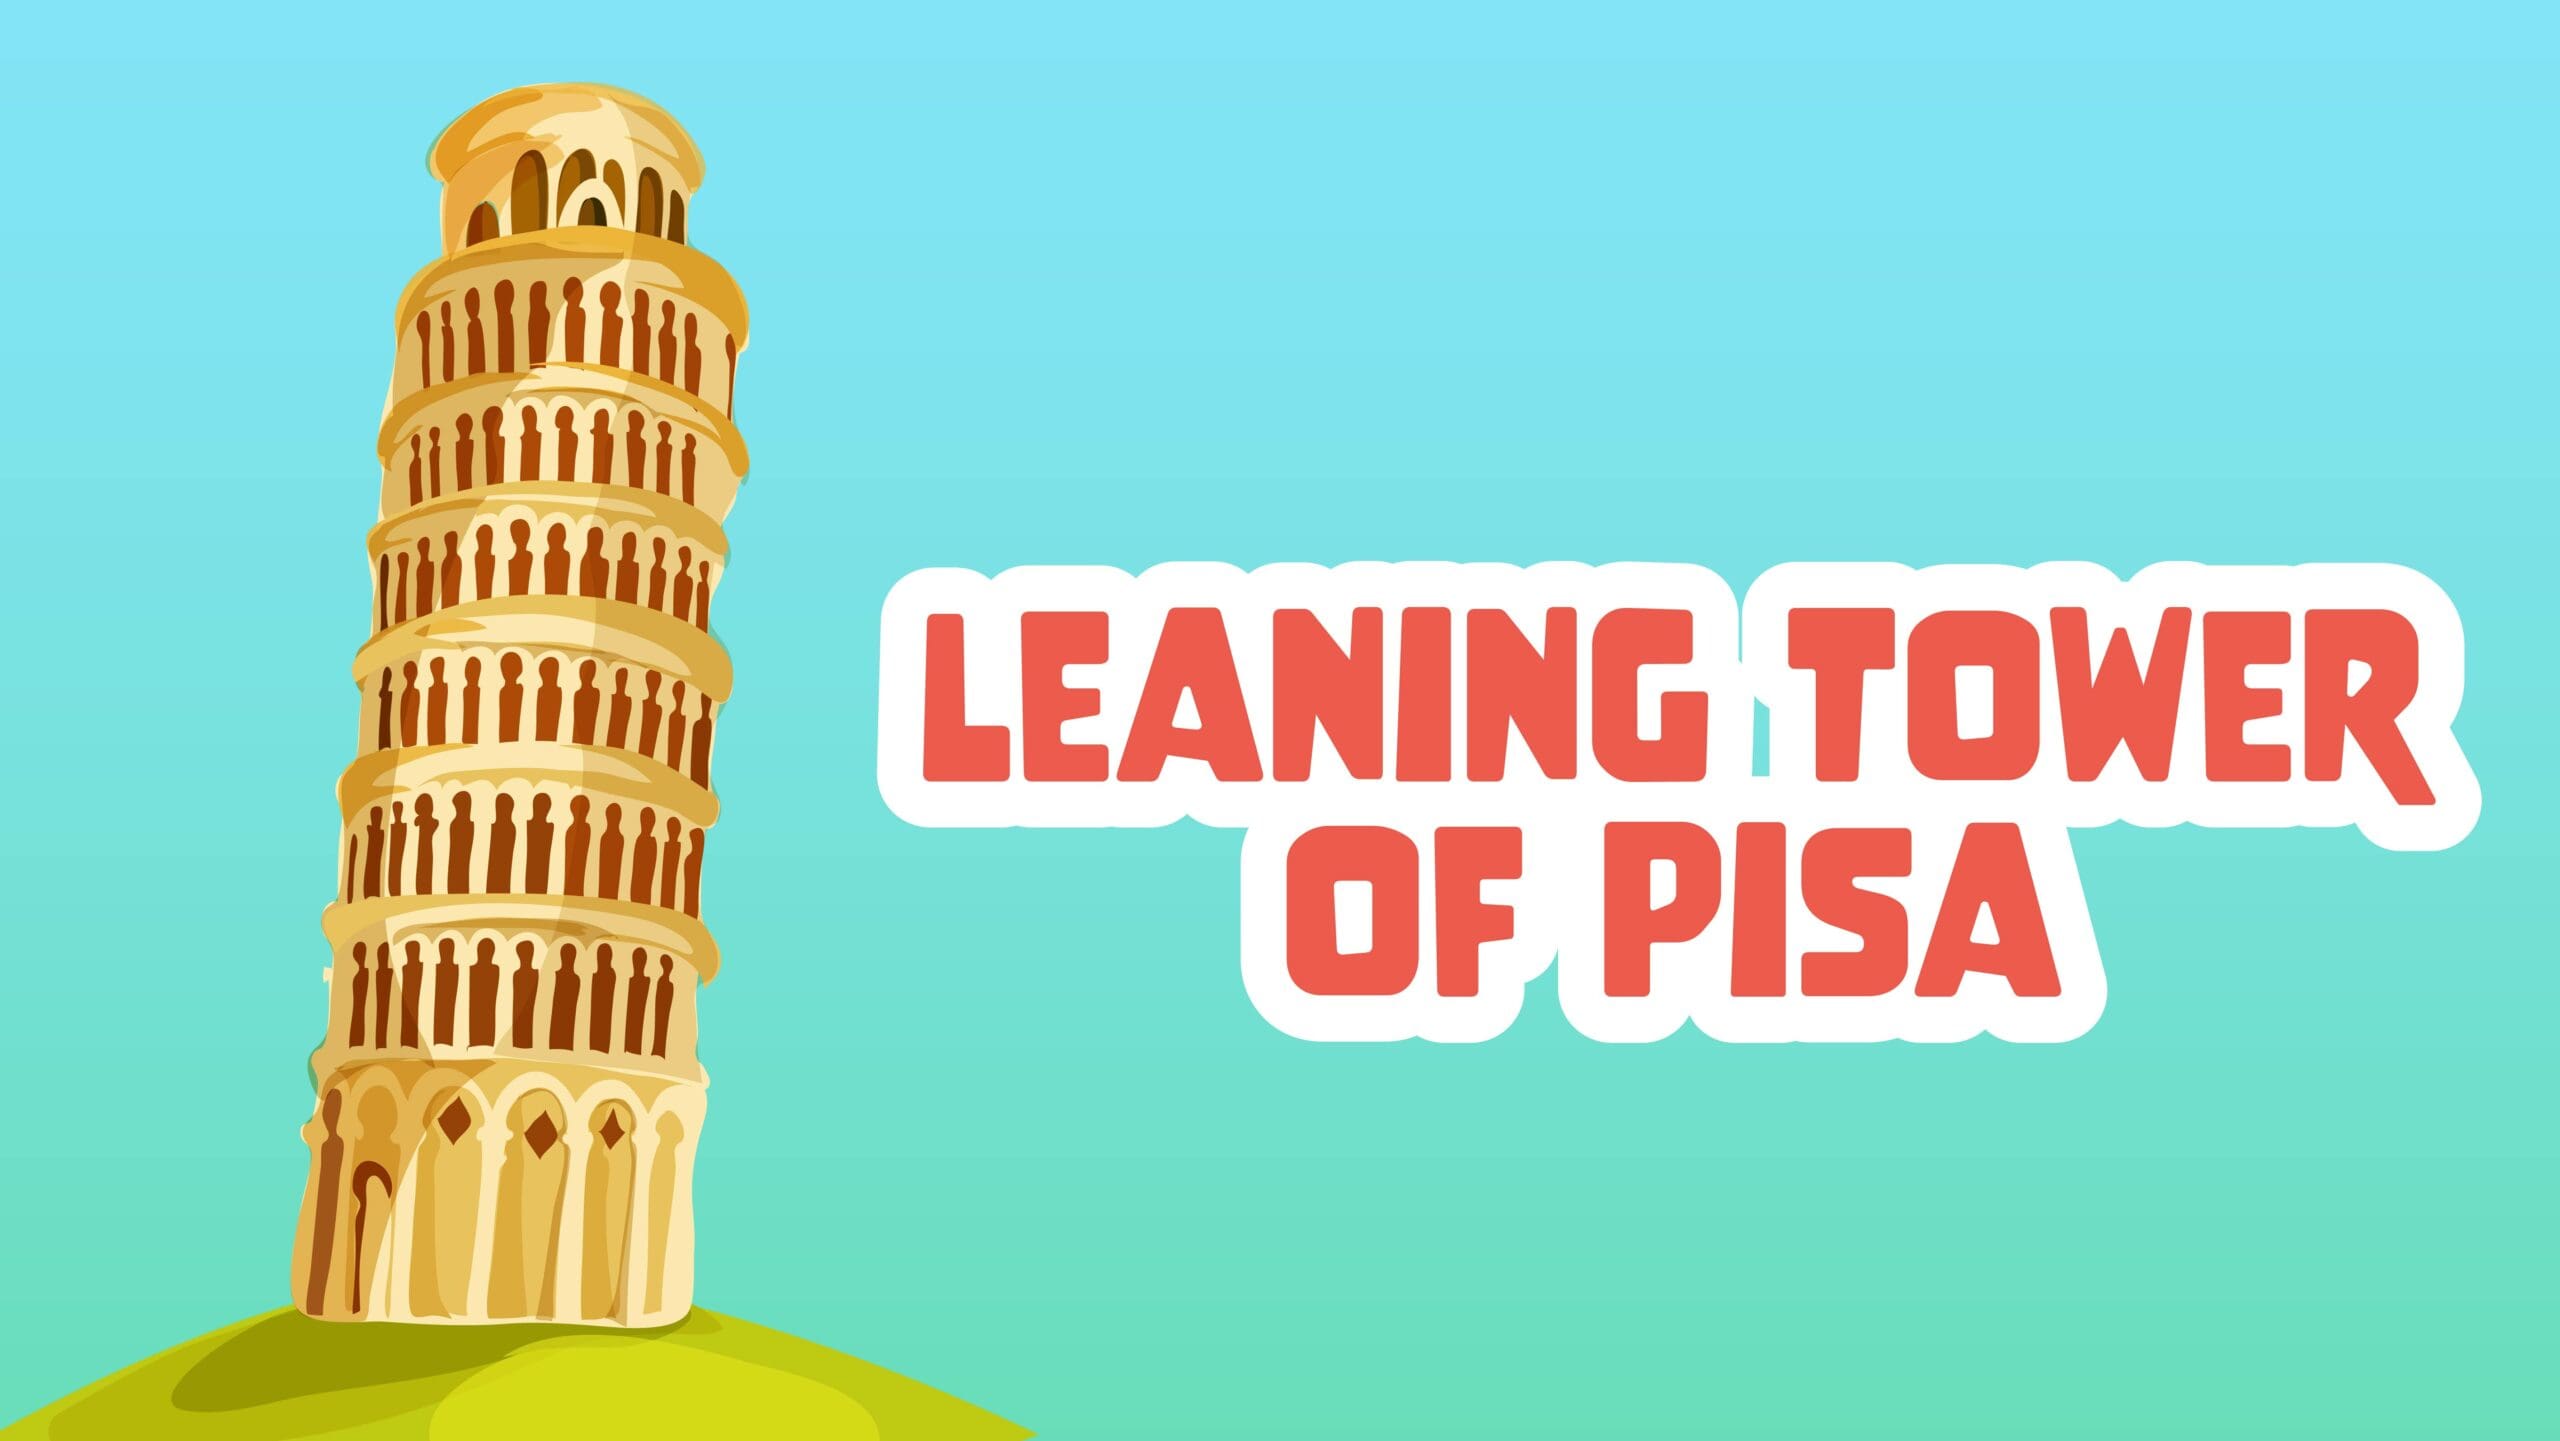 Leaning Tower of Pisa Facts for Kids – 5 Intriguing Facts about the Leaning Tower of Pisa